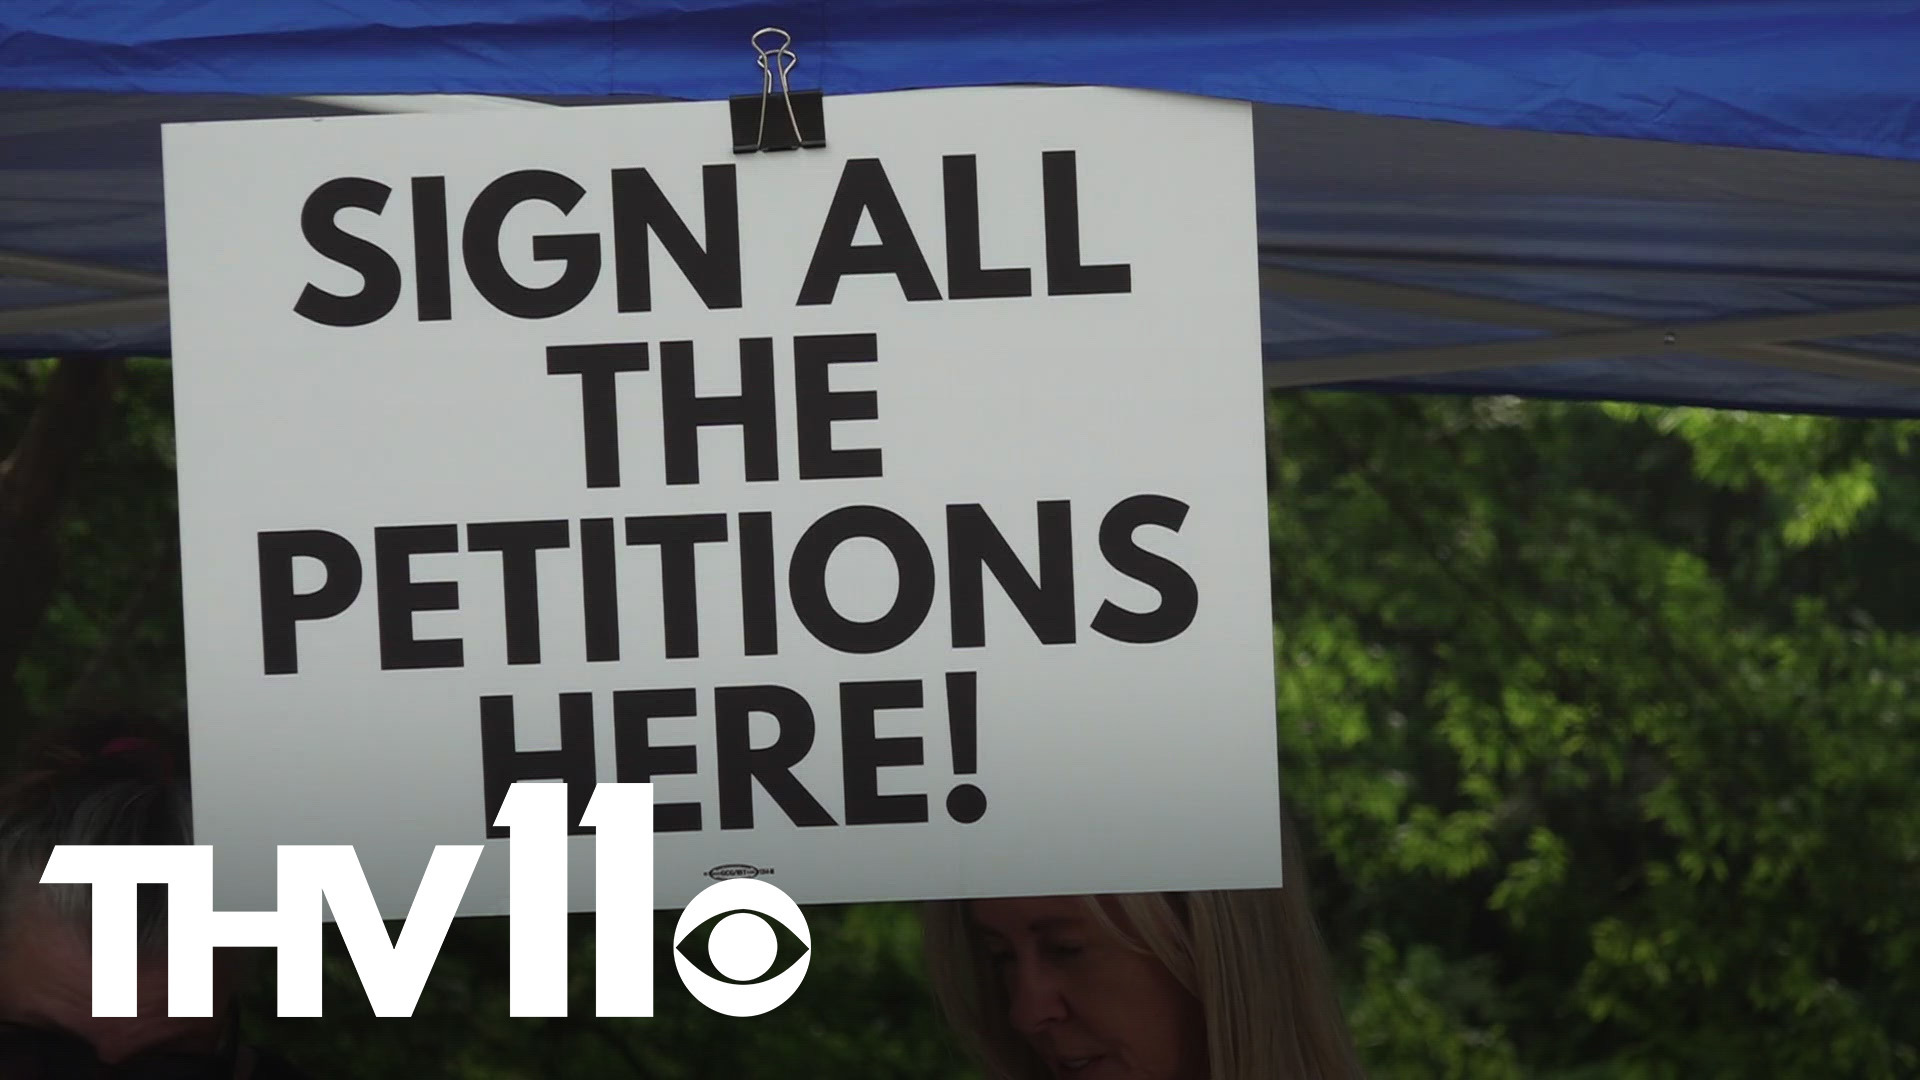 Ahead of the July 5 due date, organizers will be at locations around the state trying to reach the required 90,000+ signatures on each ballot initiative.